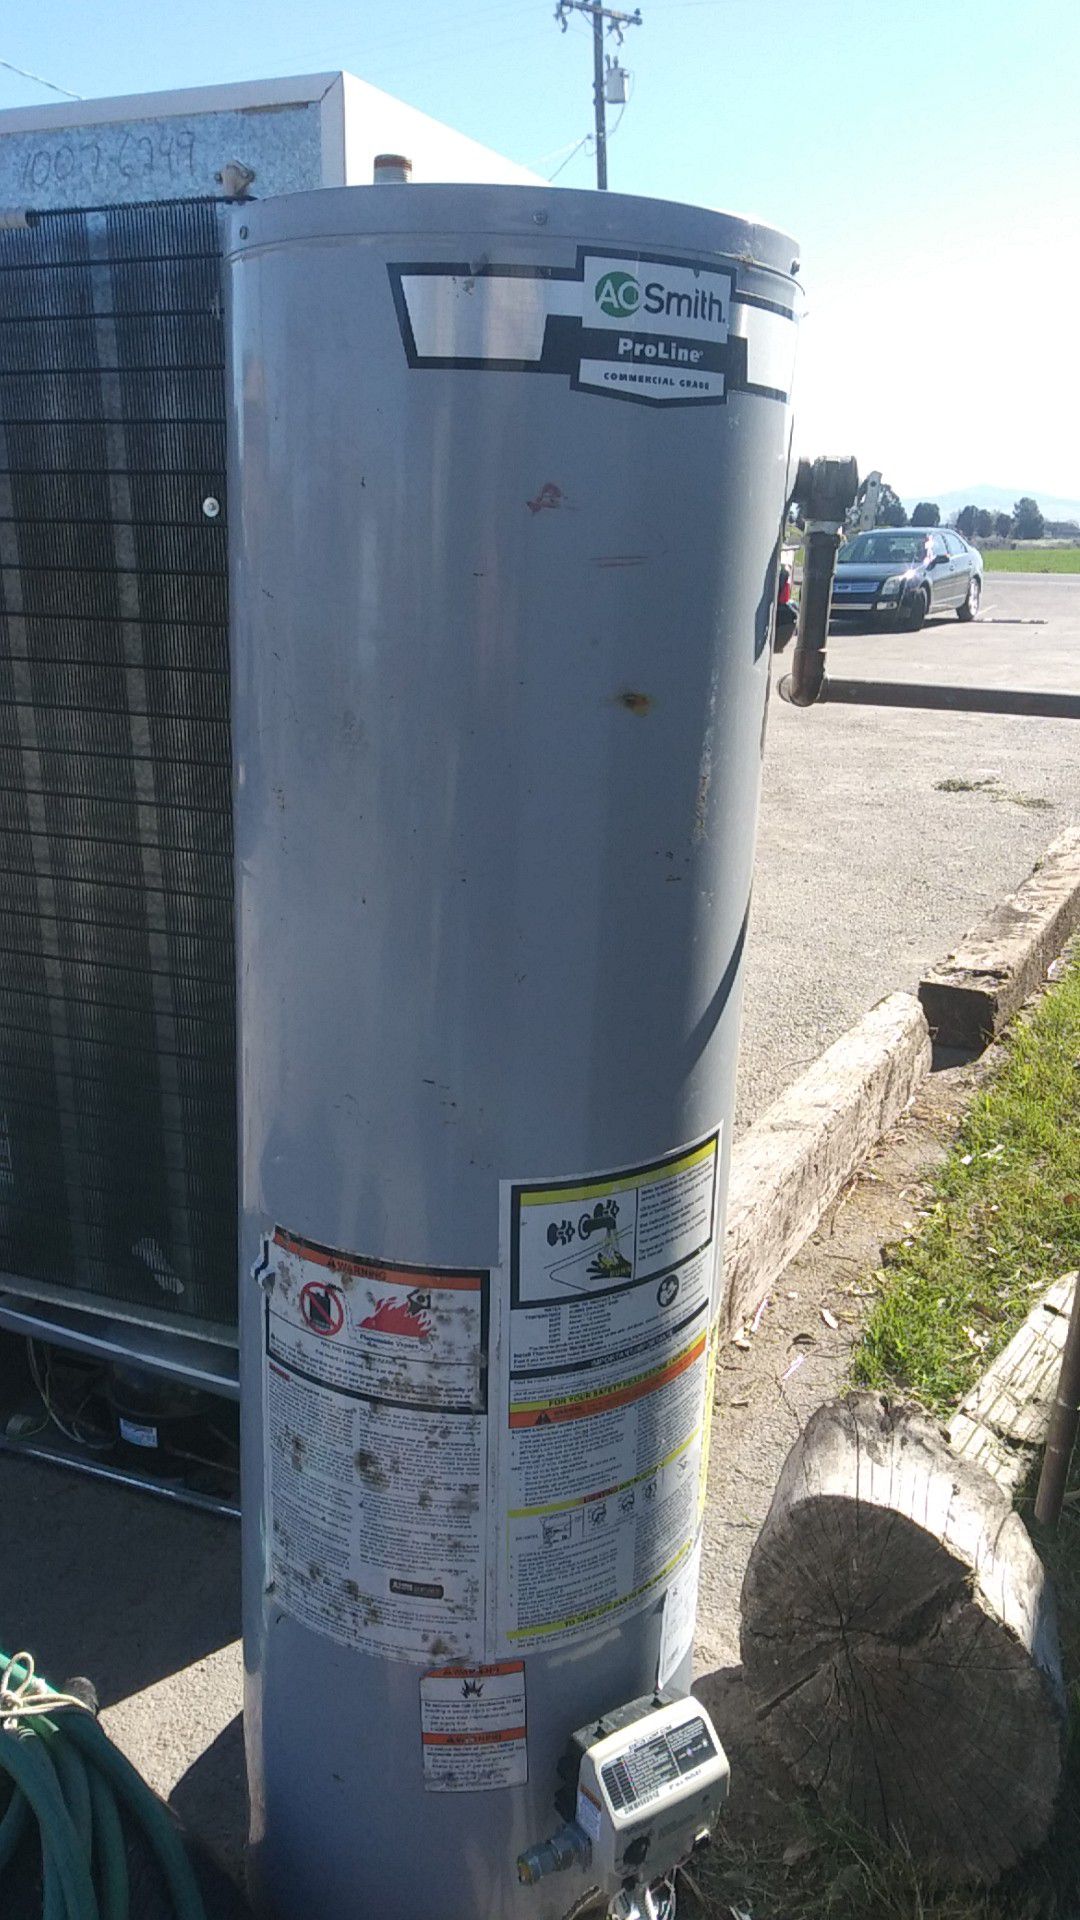 Natural gas water heater